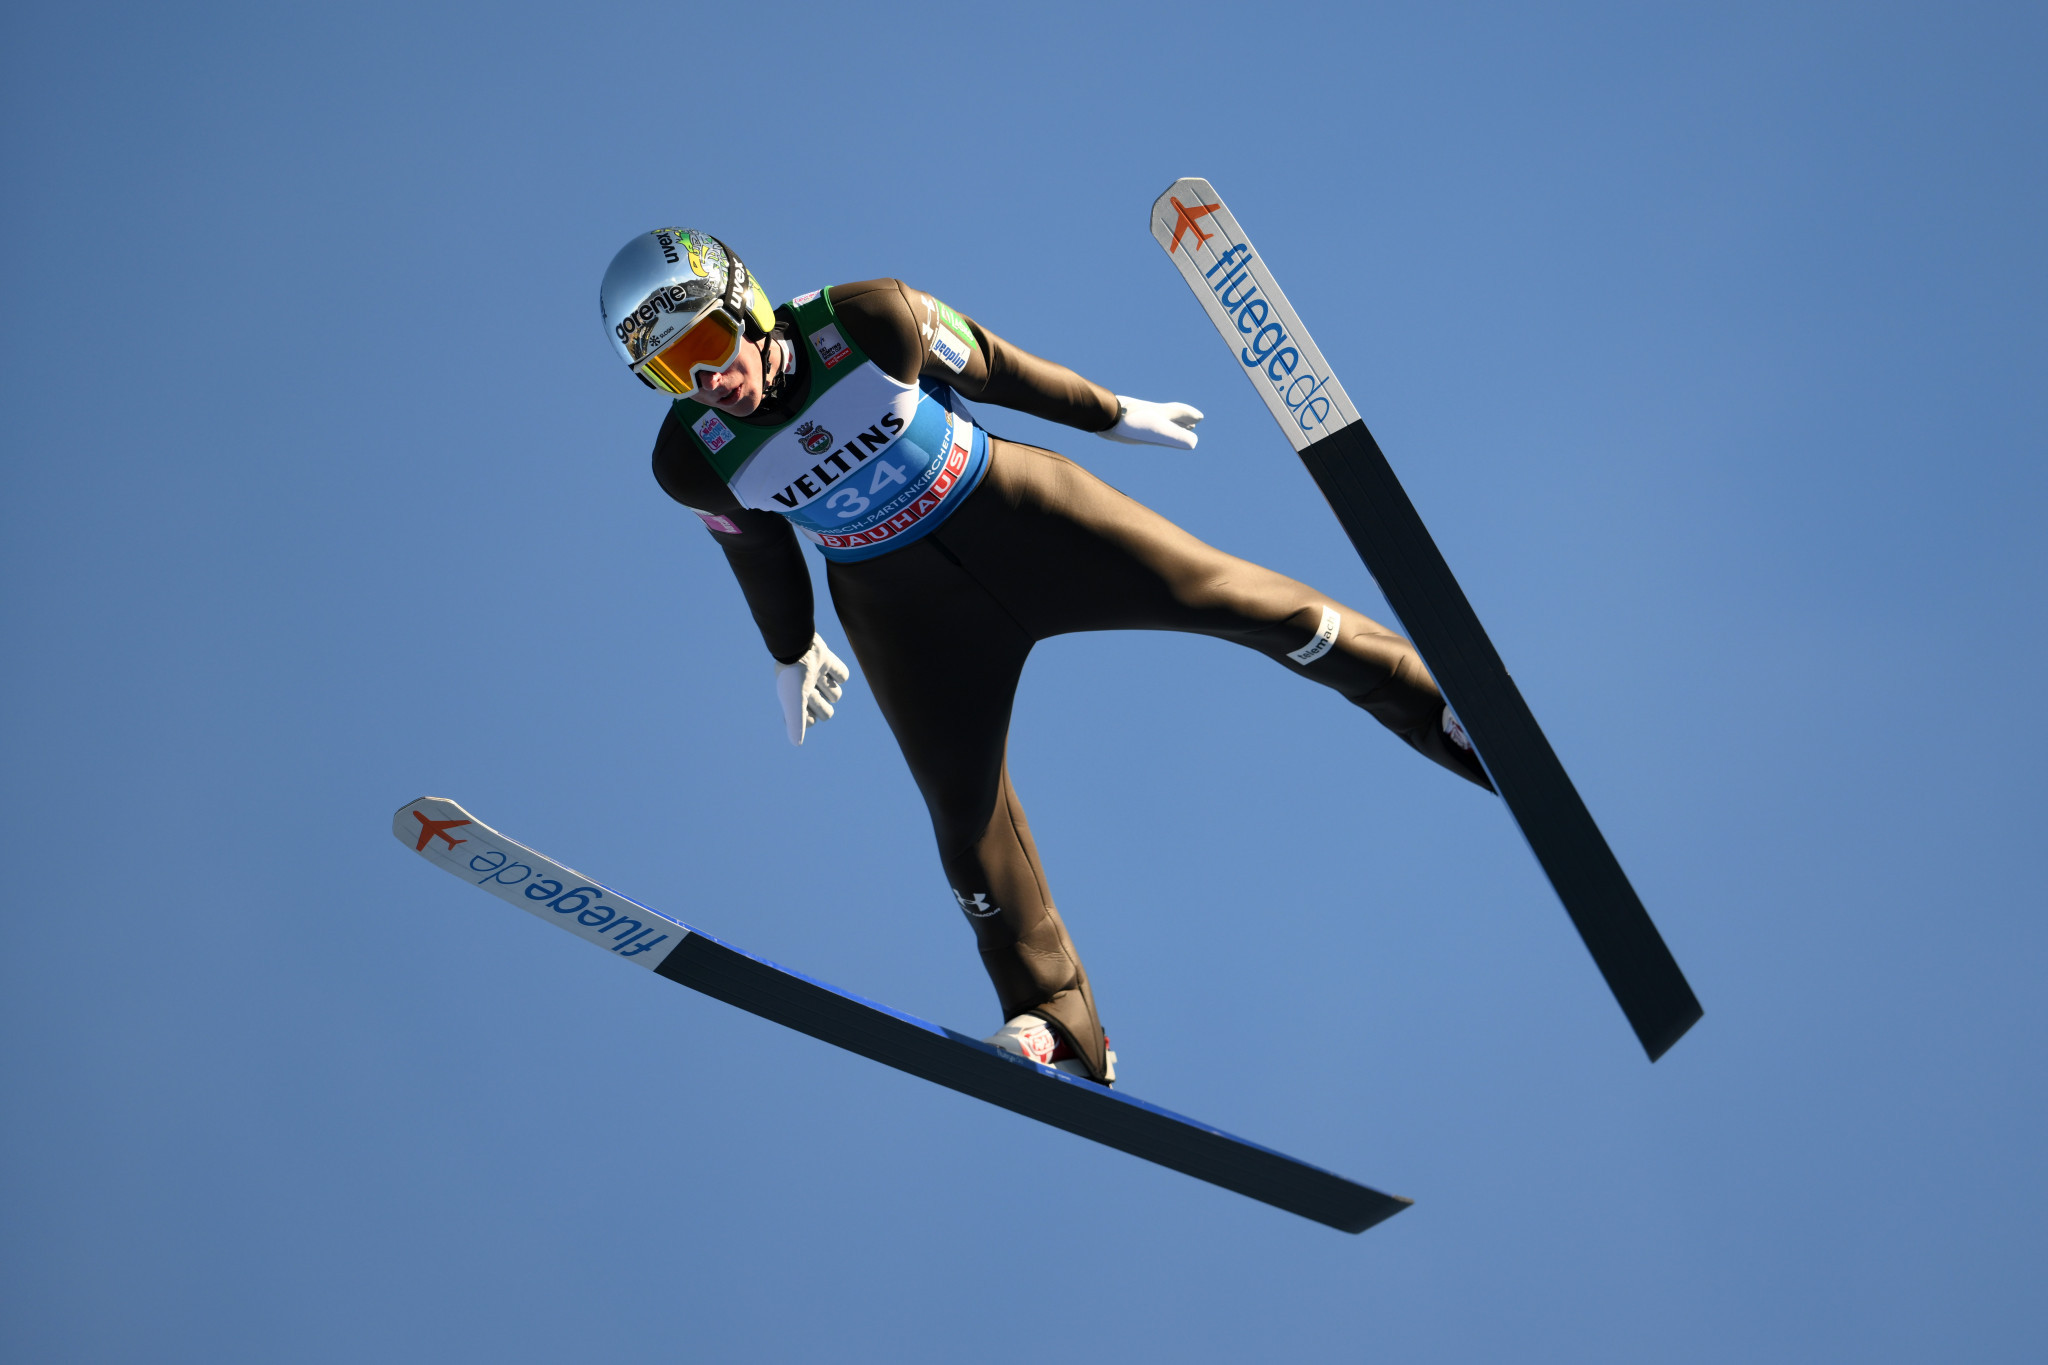 Timi Zajc fended off Stefan Kraft and Piotr Żyła to win gold at the Ski Jumping World Cup in Oberstdorf ©Getty Images